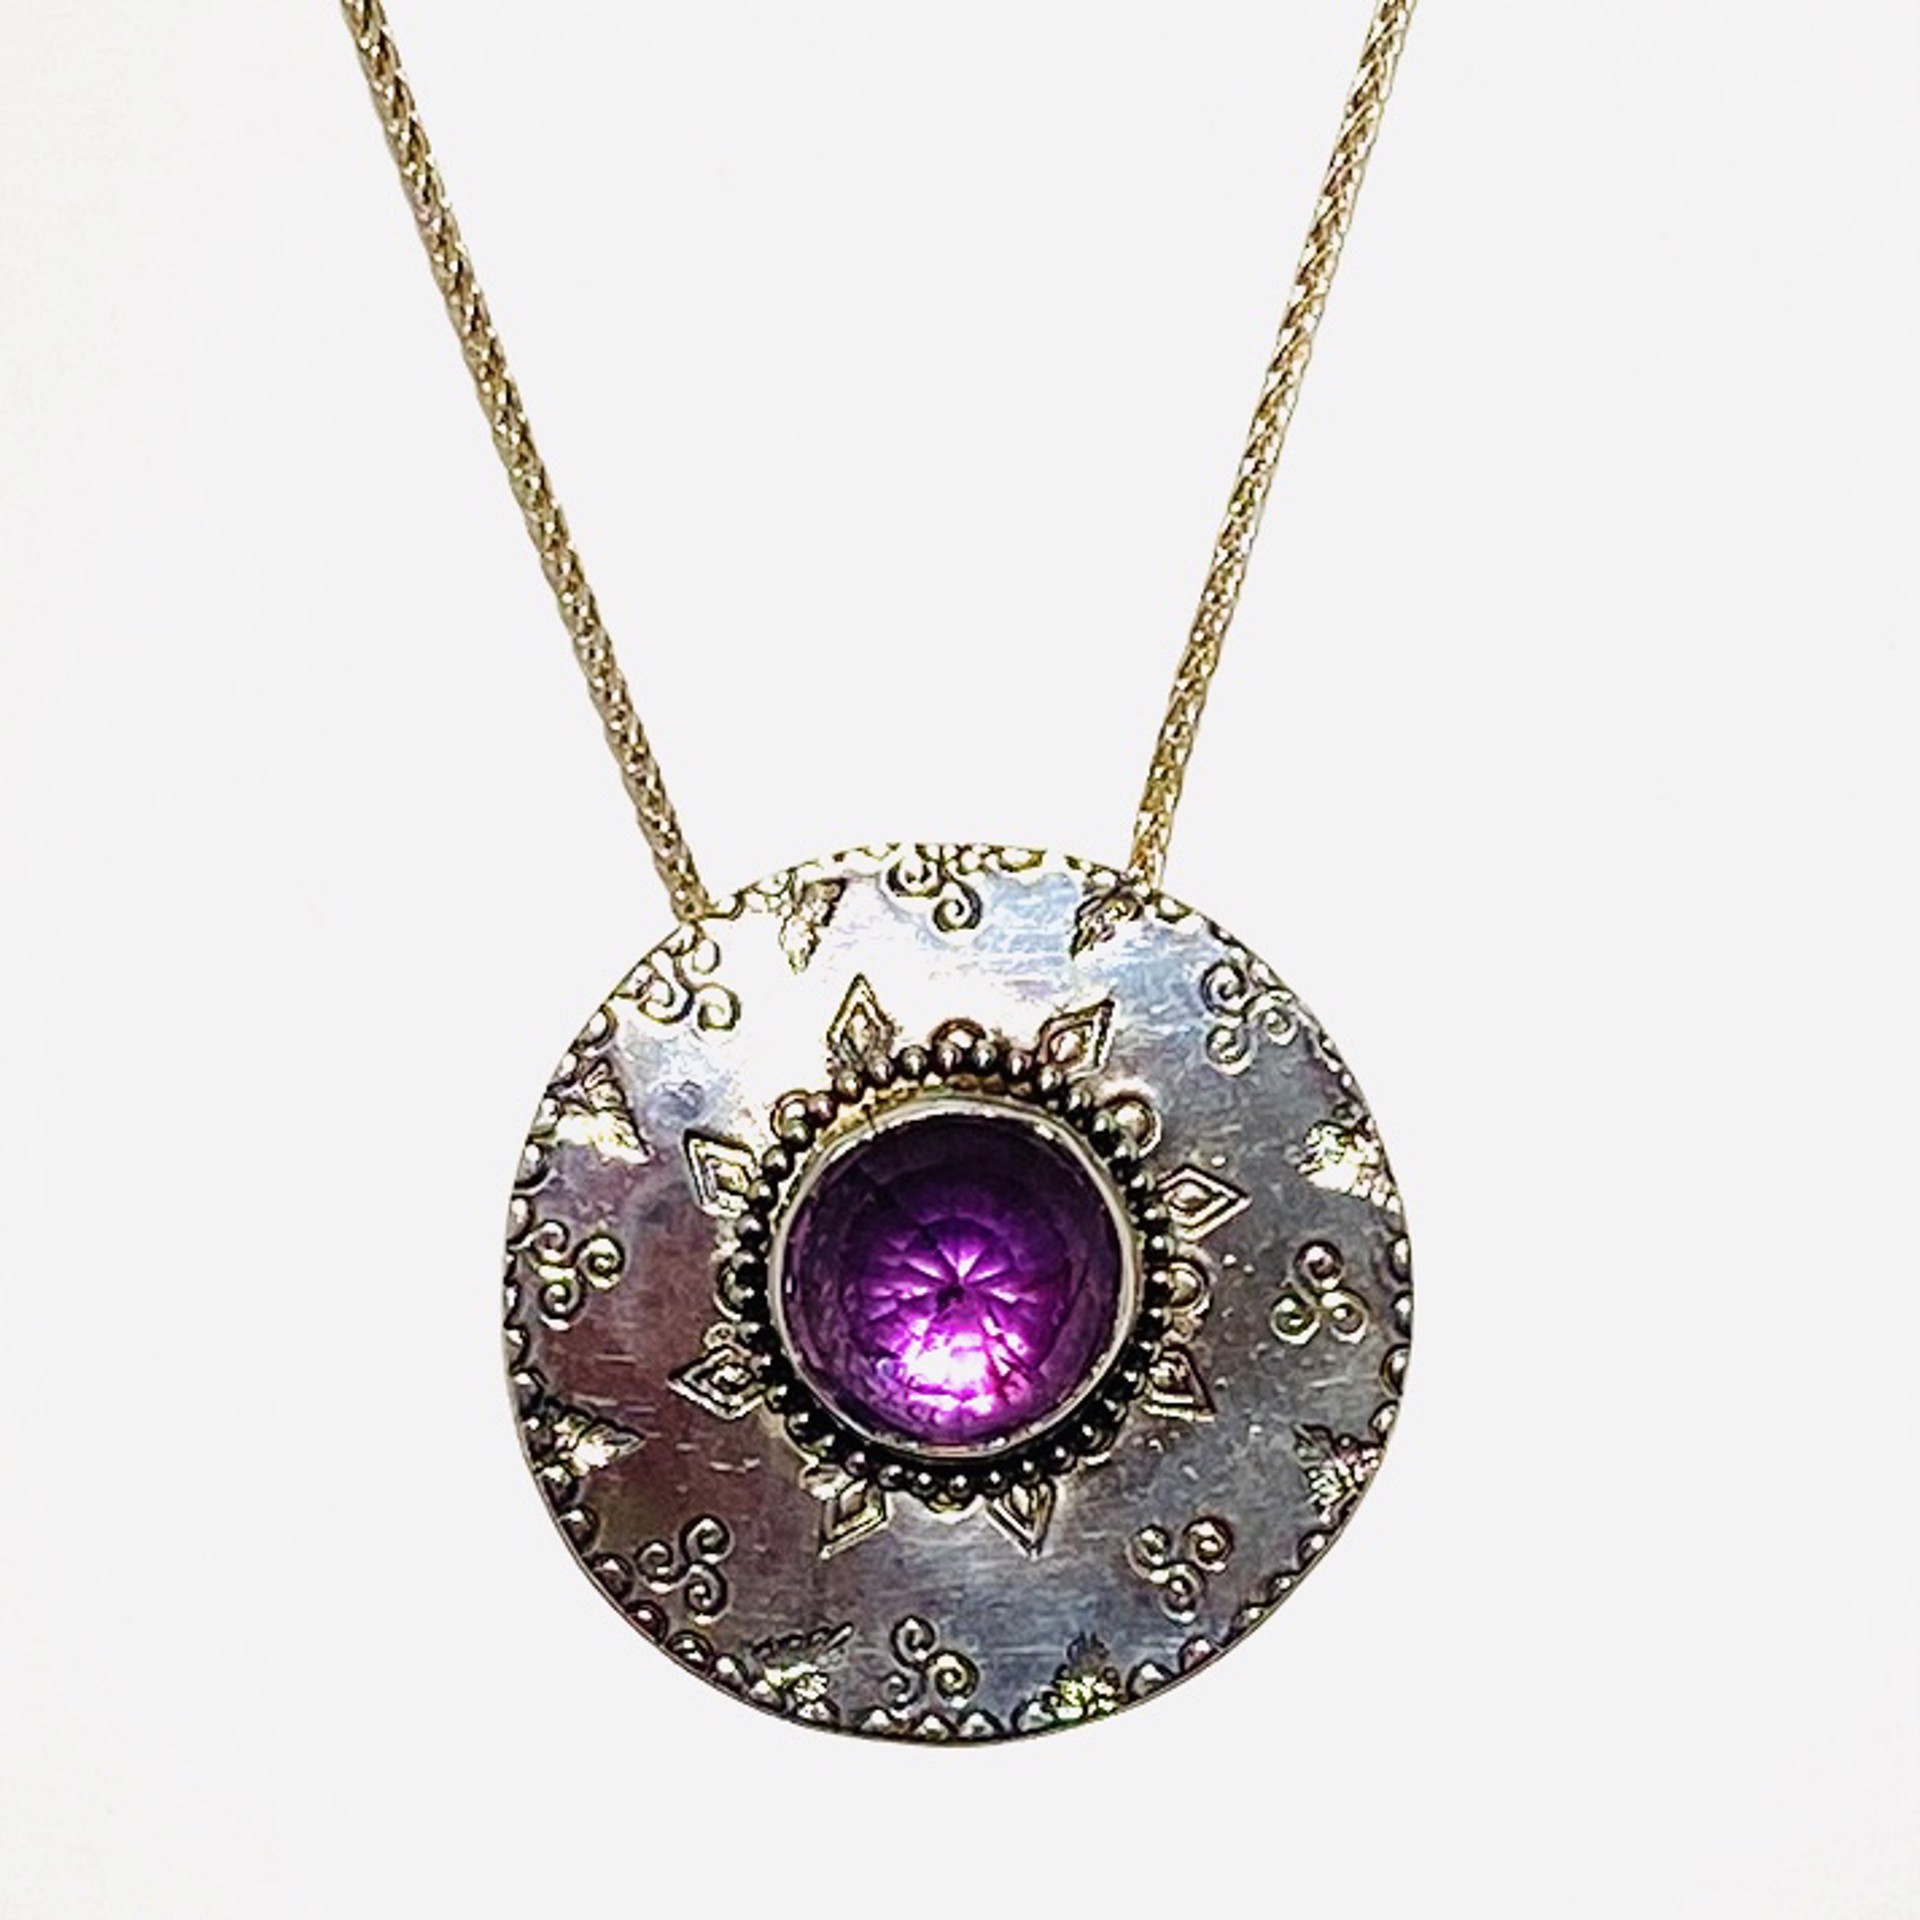 Hand-stamped Circle Medallion Faceted Amethyst Necklace AB23-40 by Anne Bivens